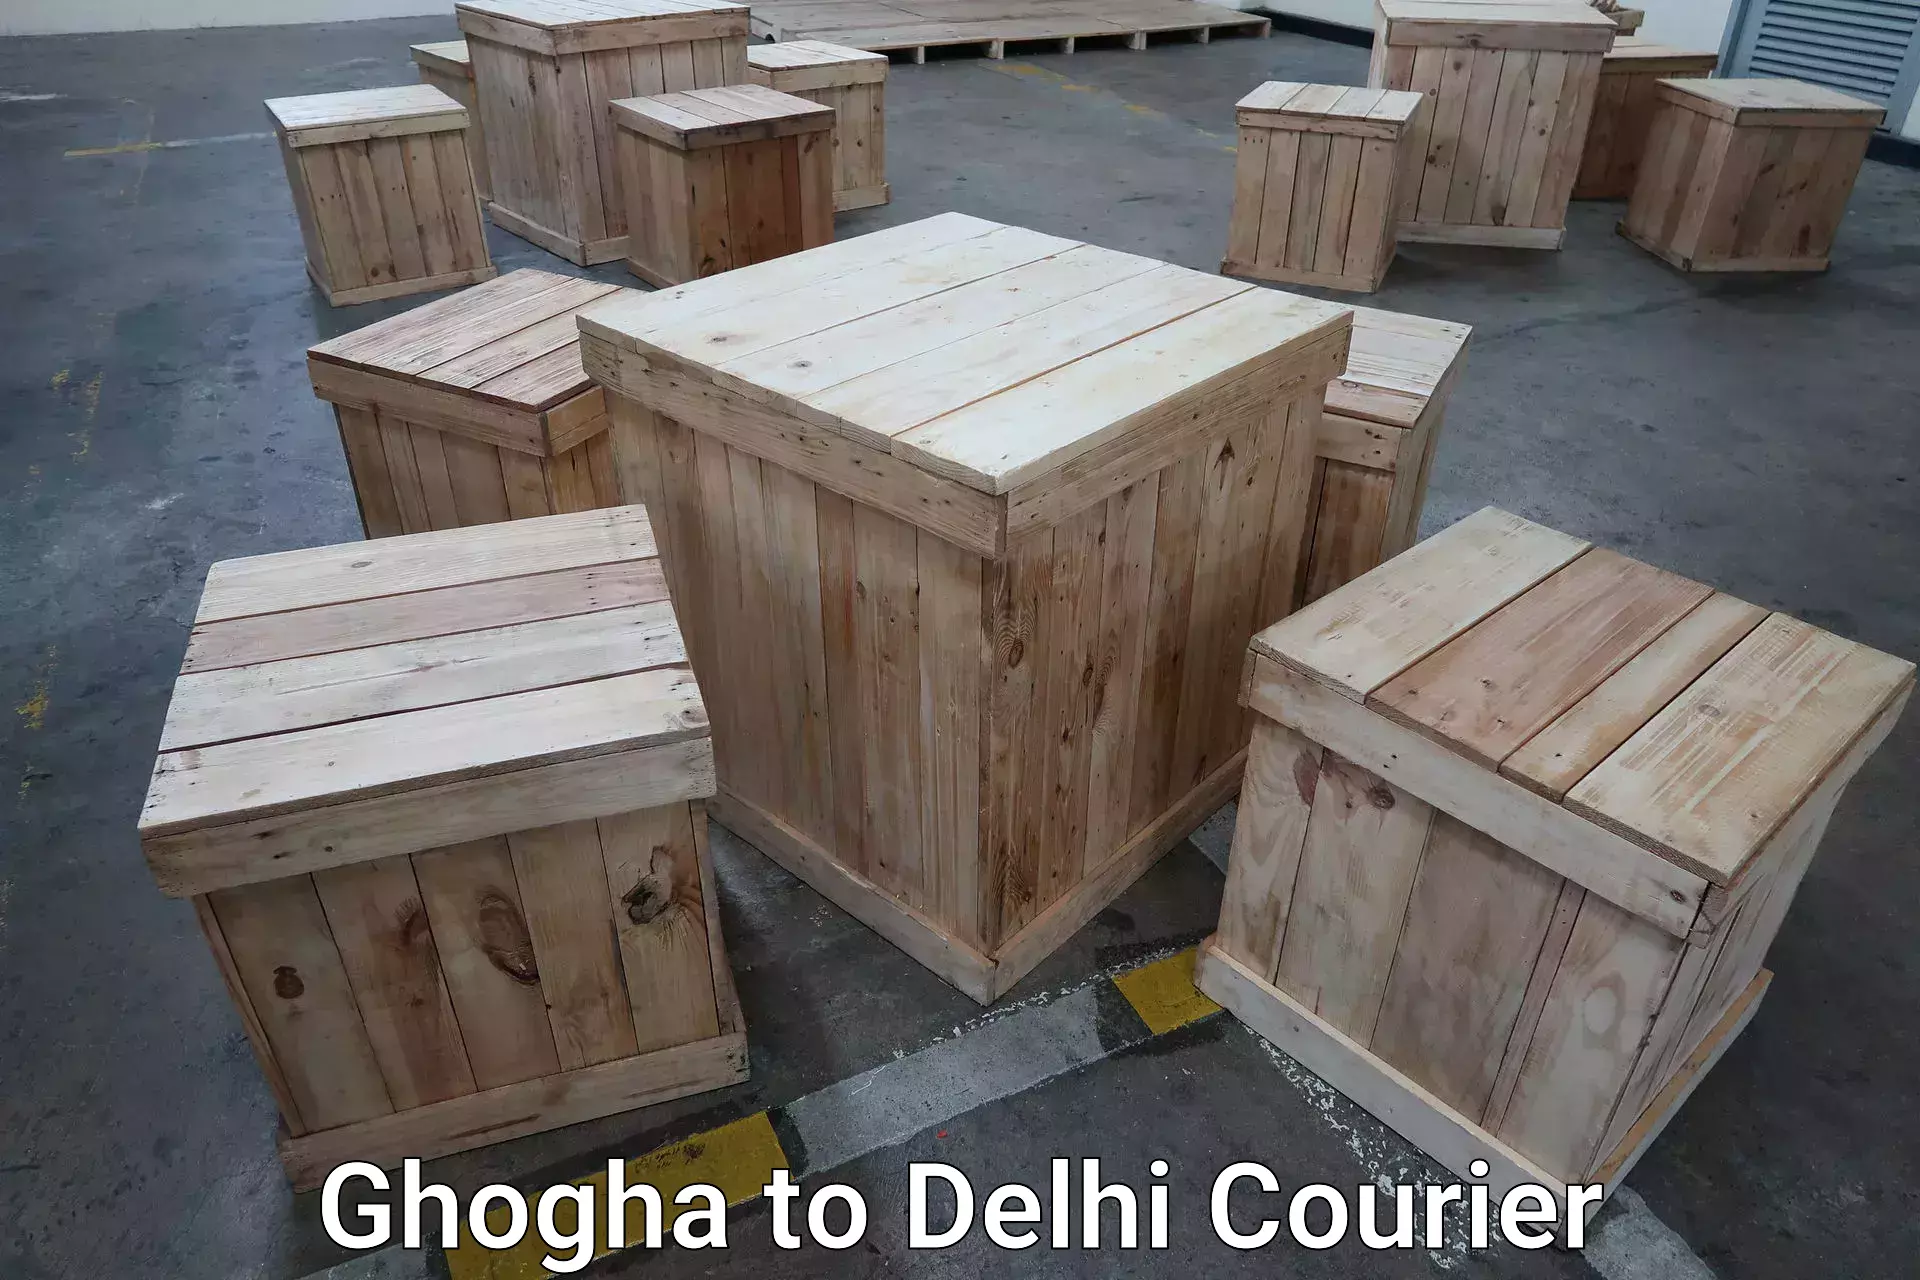 Baggage transport professionals Ghogha to Delhi